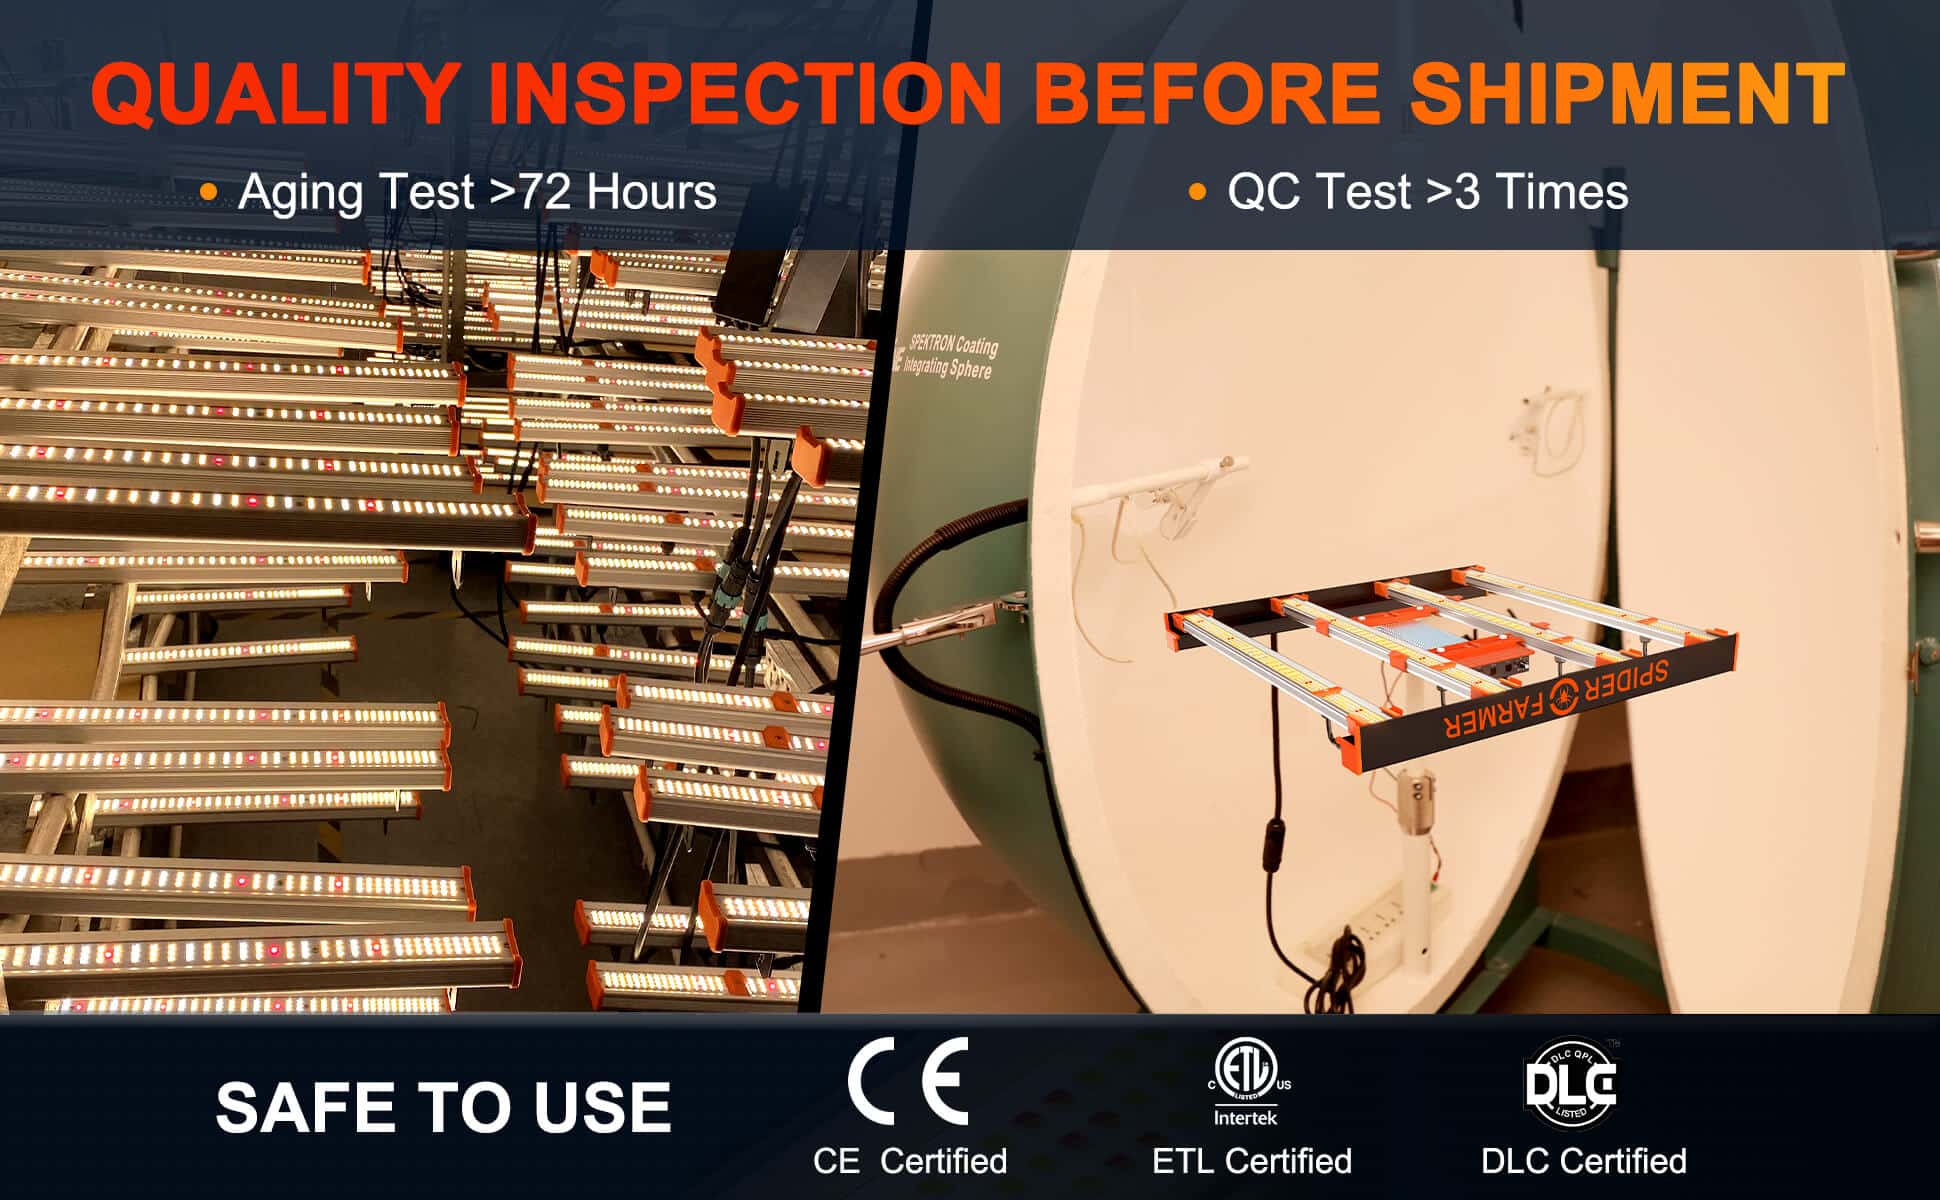 Quality-Inspection-Before-Shipment